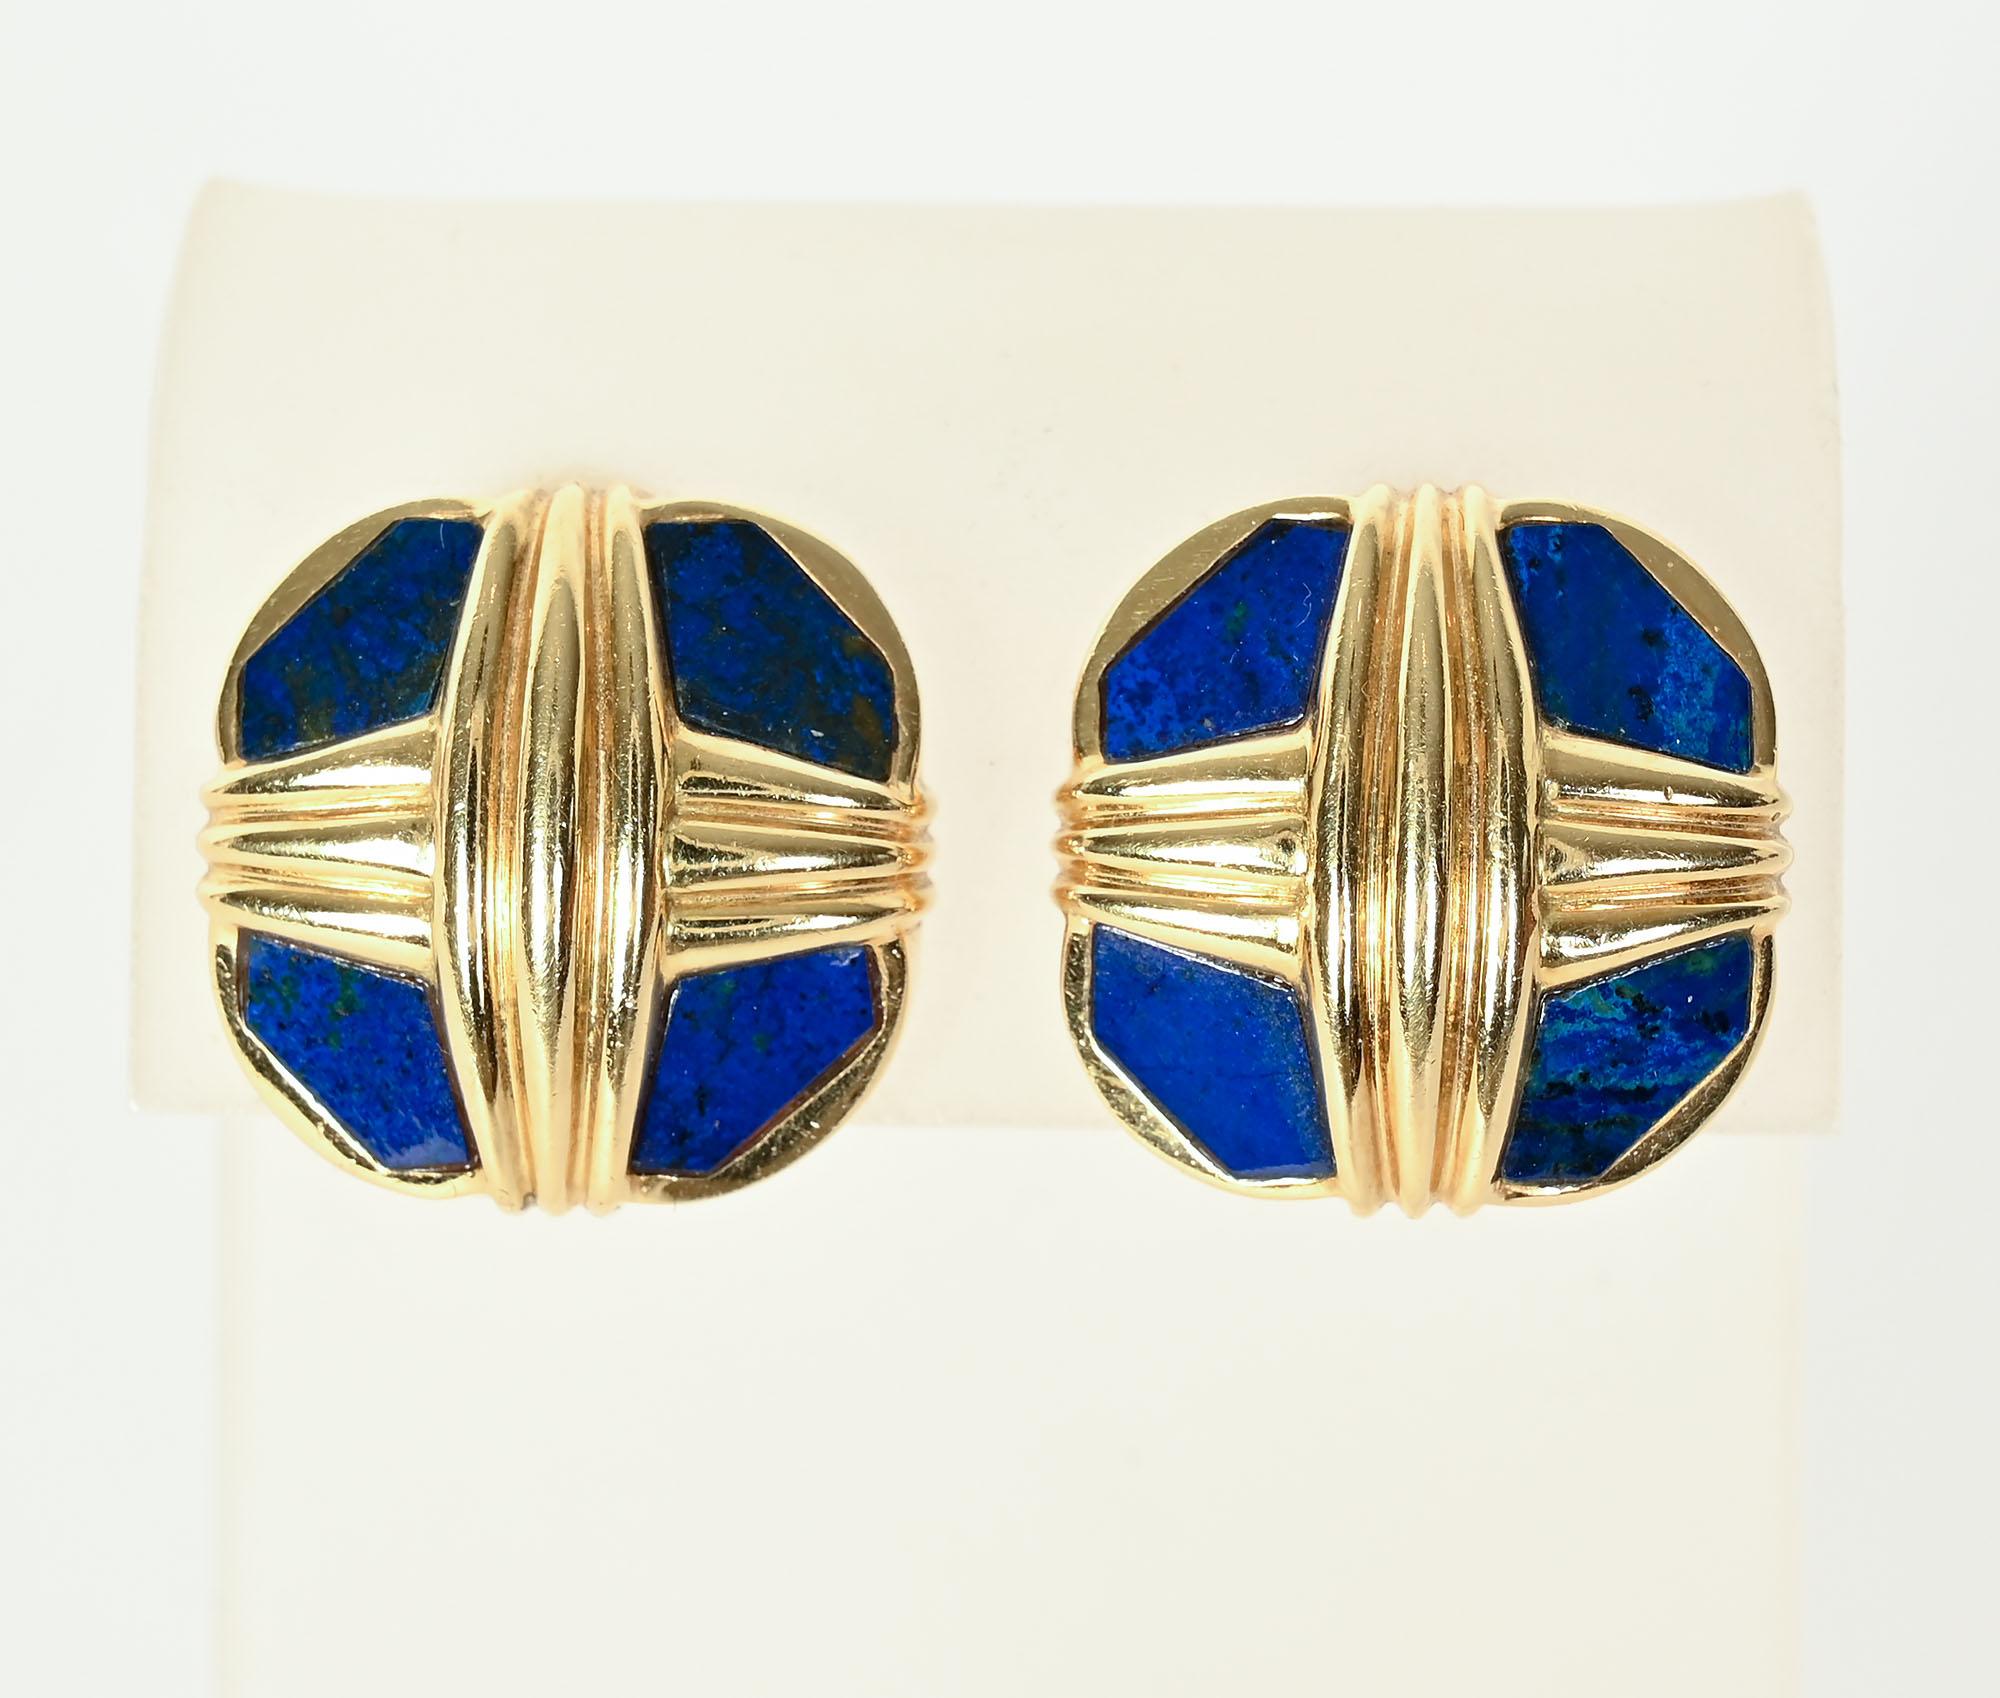 Sporty and chic colorful earrings by David Webb. The earrings are octagonal in shape with criss cross banding over the lapis lazuli. The earrings have clip backs that can be converted to posts.